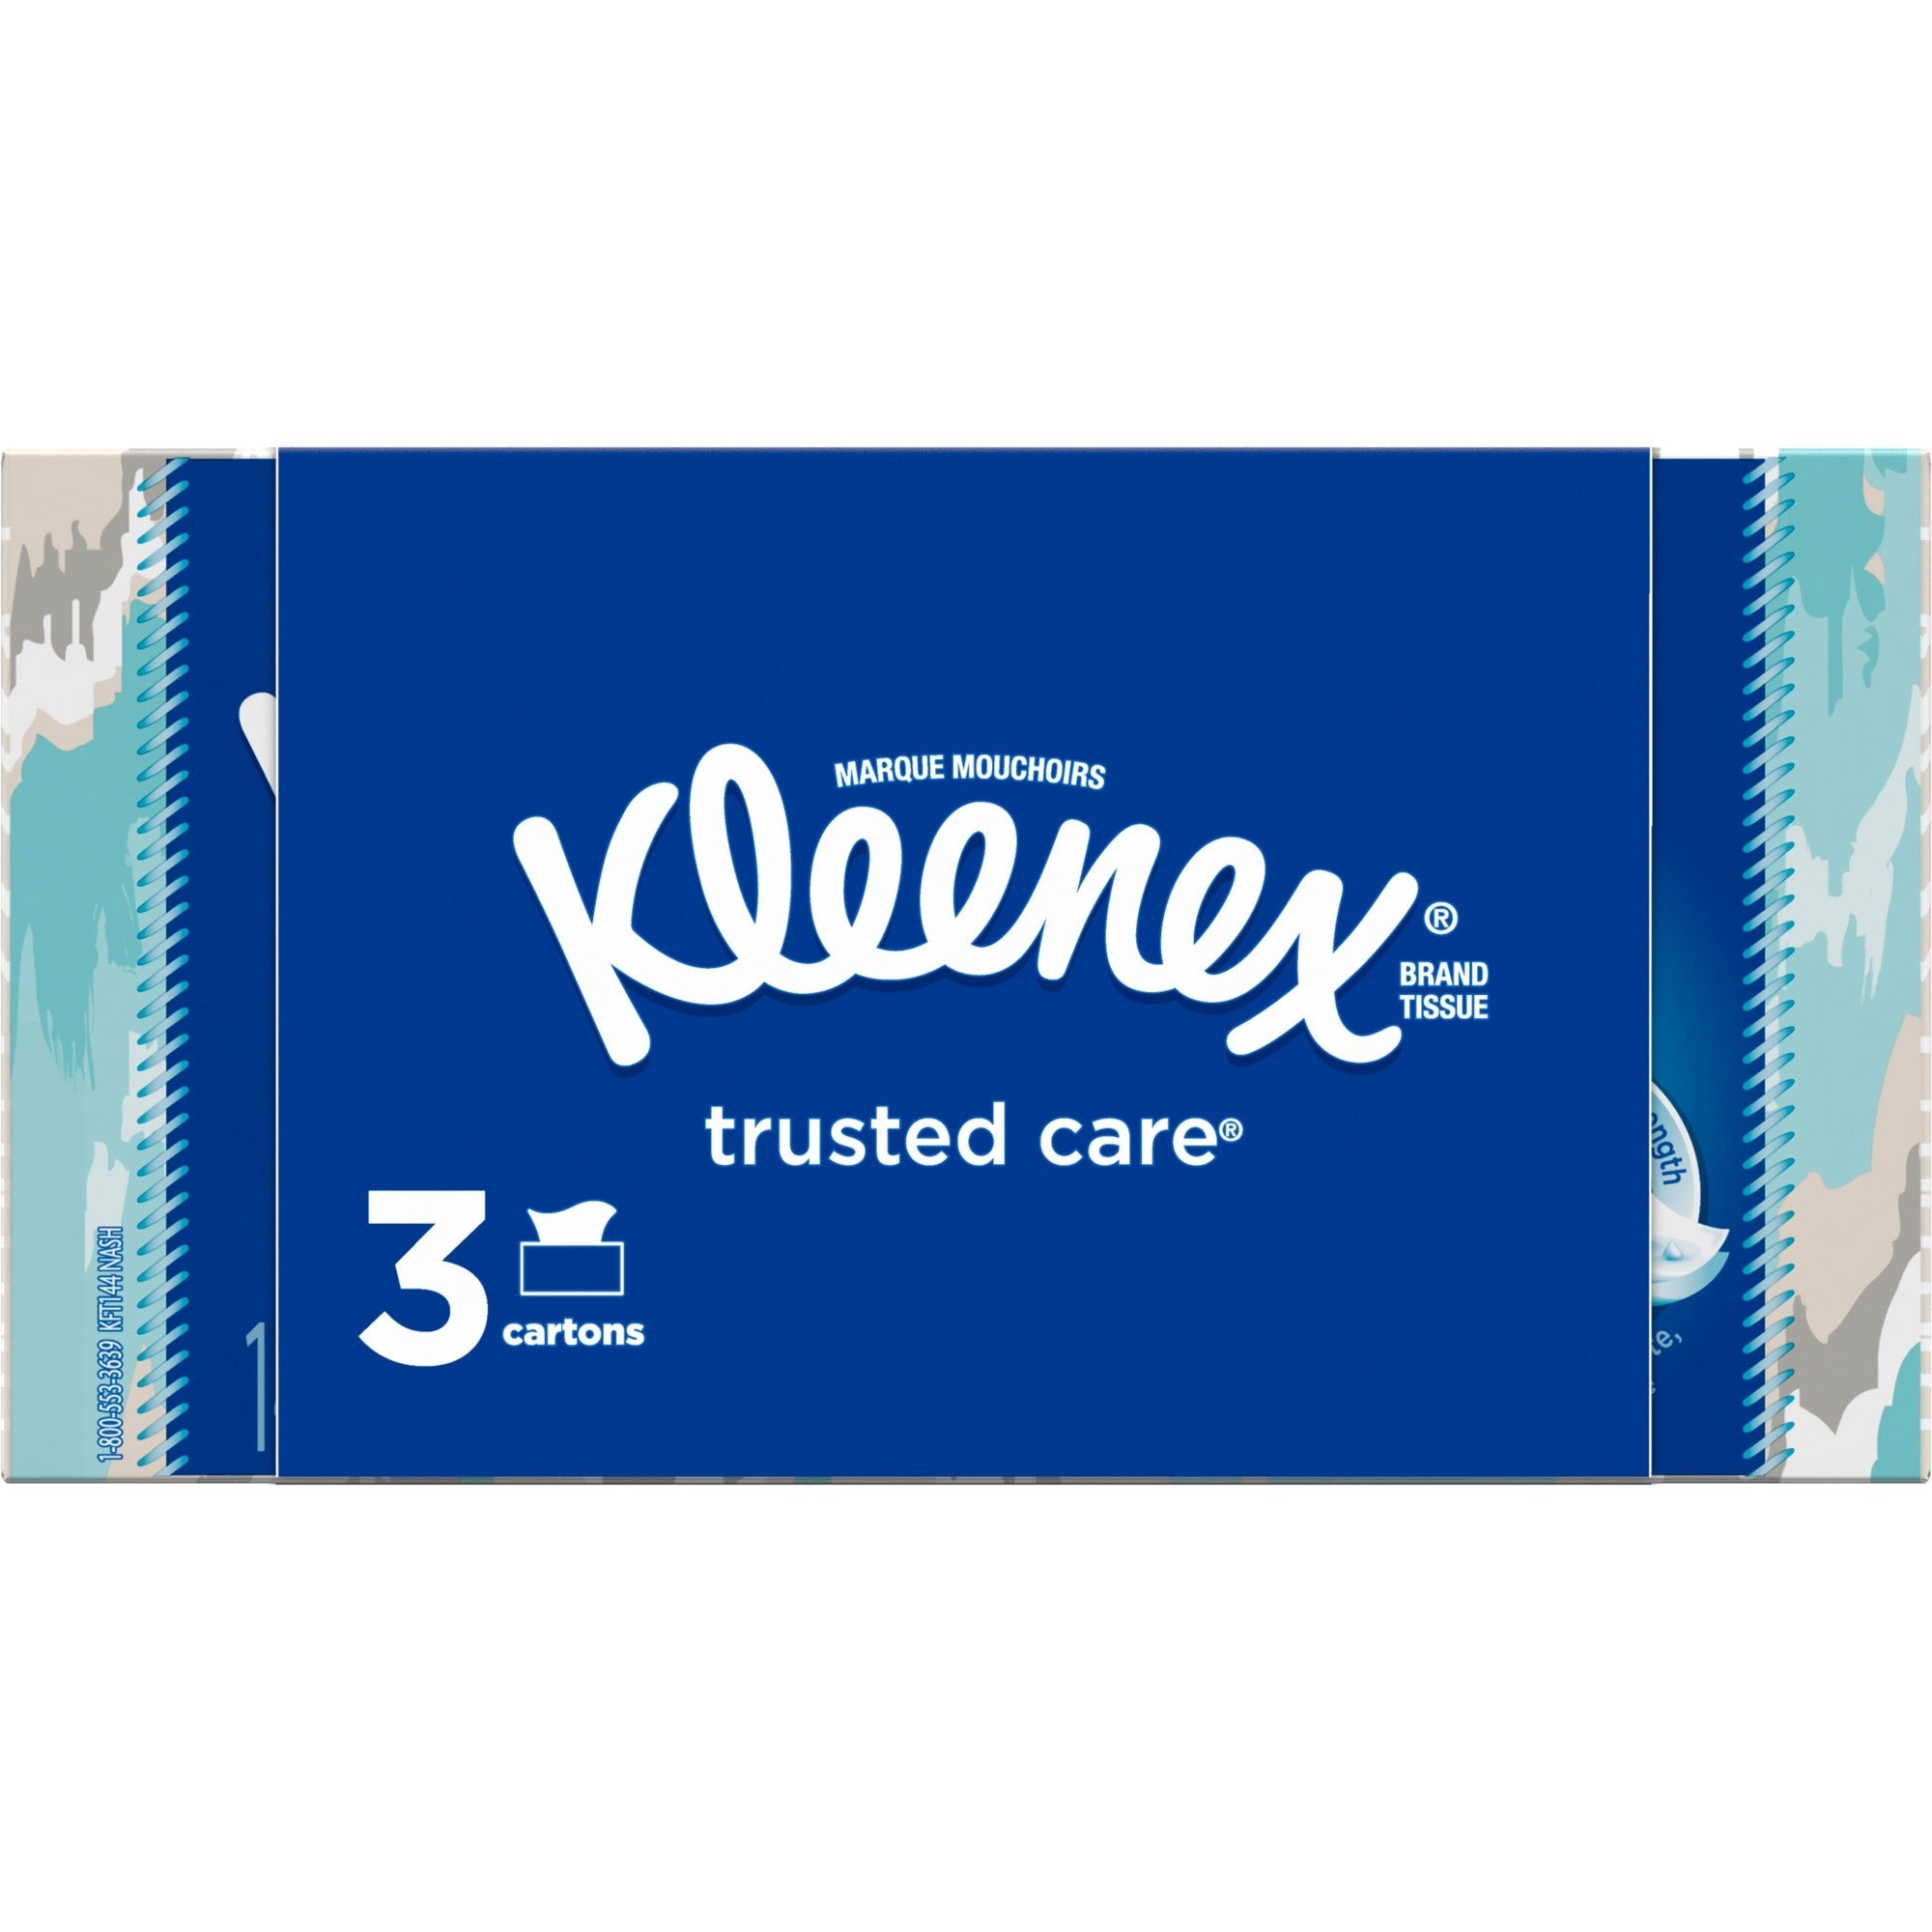 kleenex-trusted-care-facial-tissues-2-ply-820-x-840-white-soft-strong-absorbent-durable-for-home-office-school-144-per-box-3-pack_kcc50219 - 2